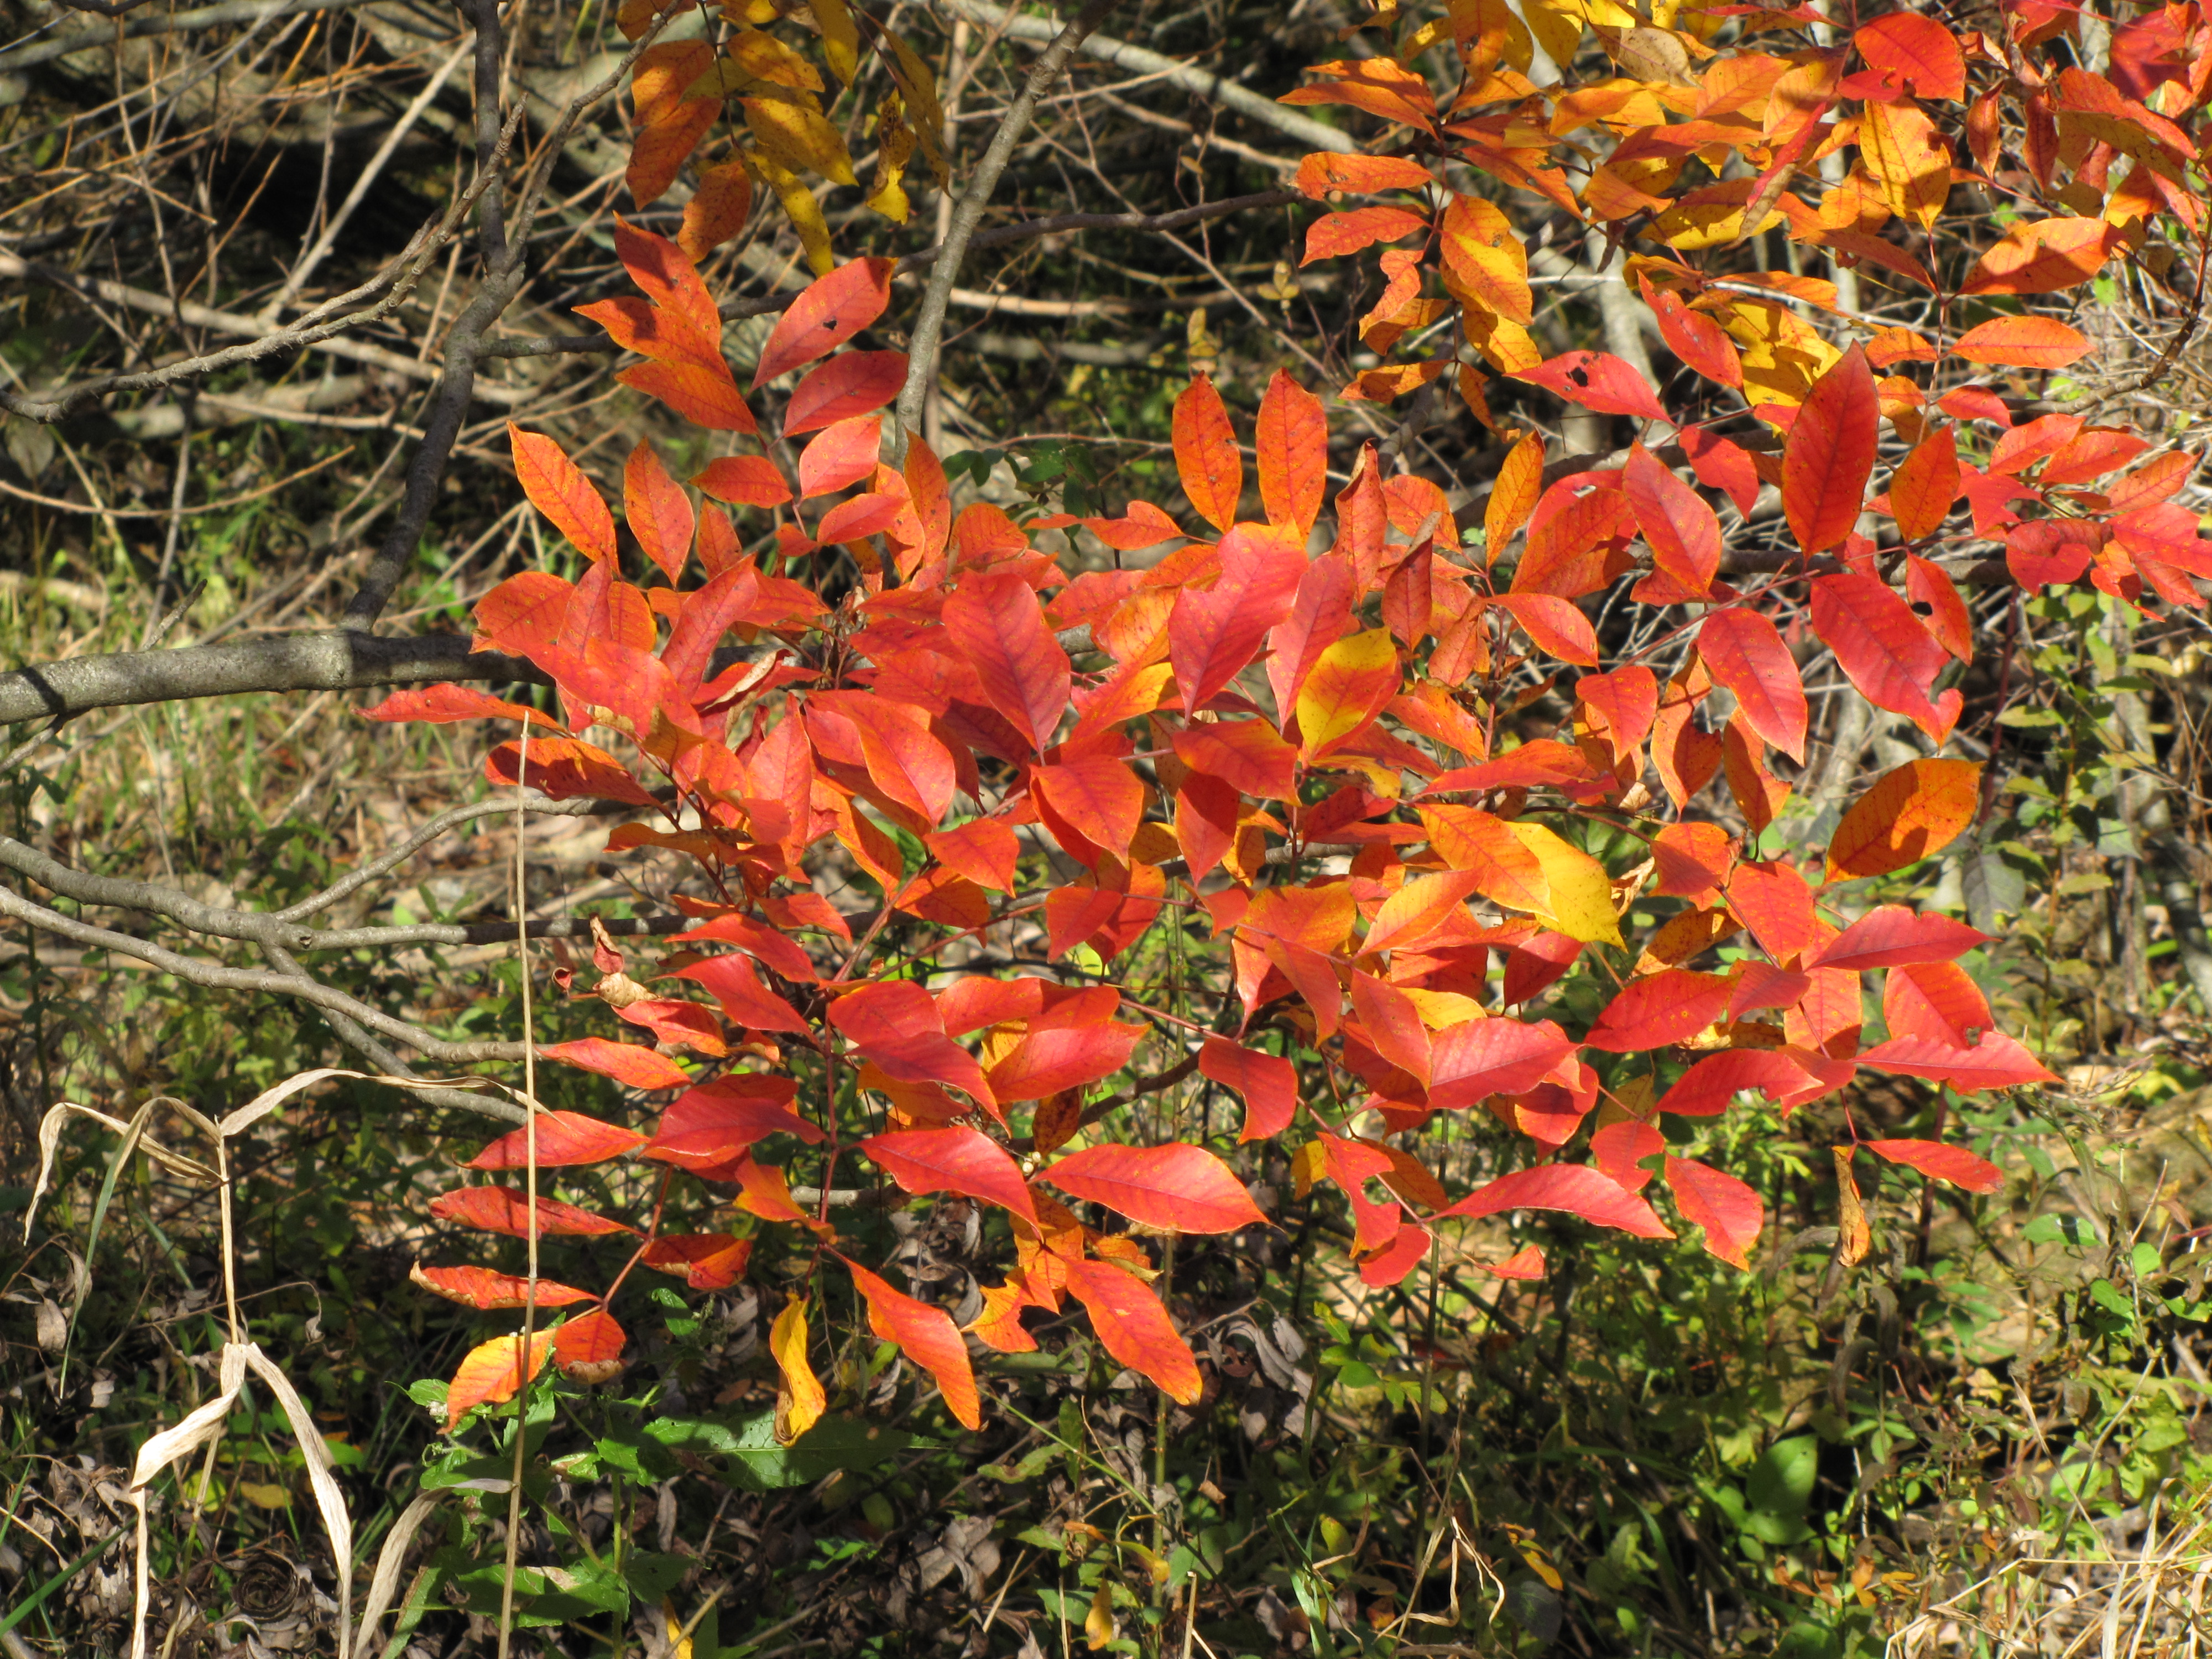 The red leaves of a poison sumac plant